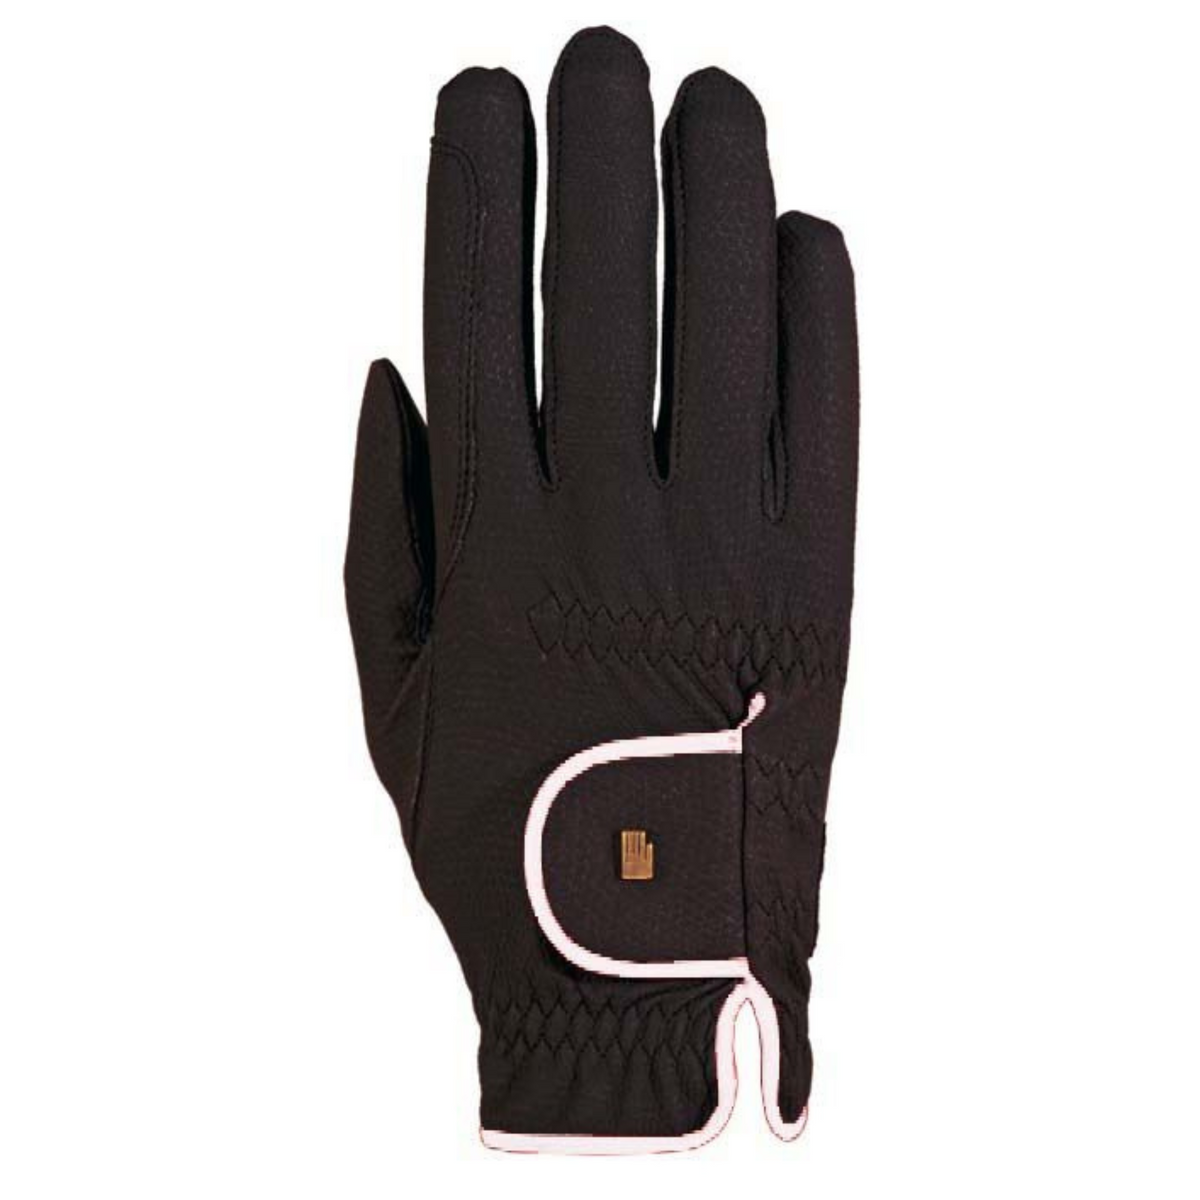 Black Roeckle Riding Gloves with white binding